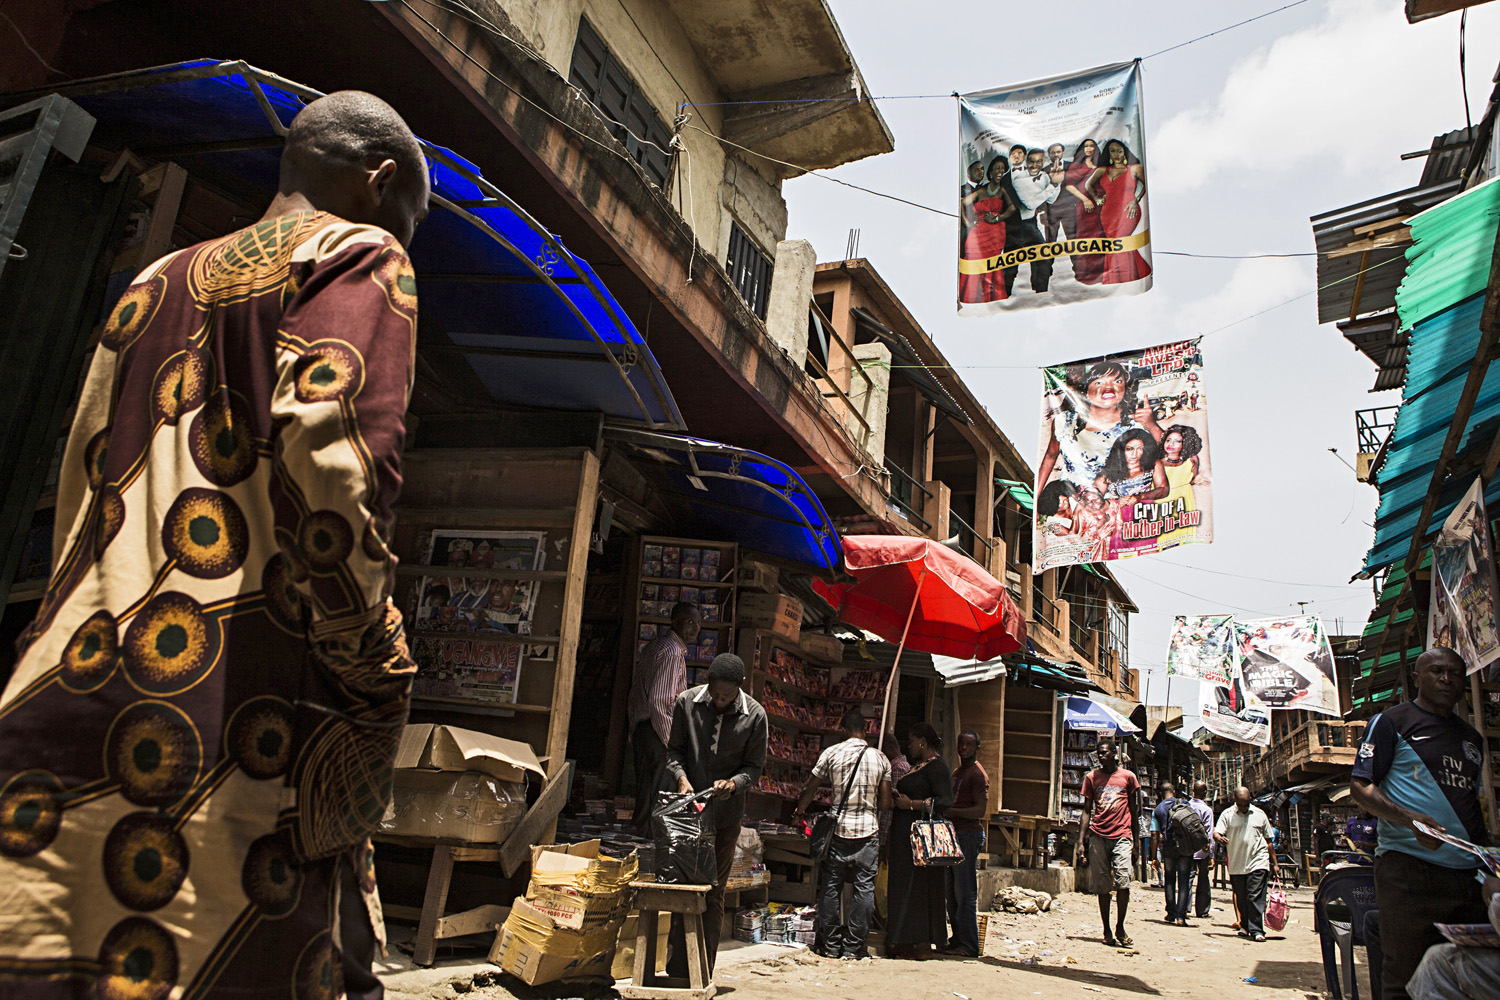 Alaba market in Lagos is Nigeria’s biggest hub for buying and selling movies (Glenna Gordon for TIME)